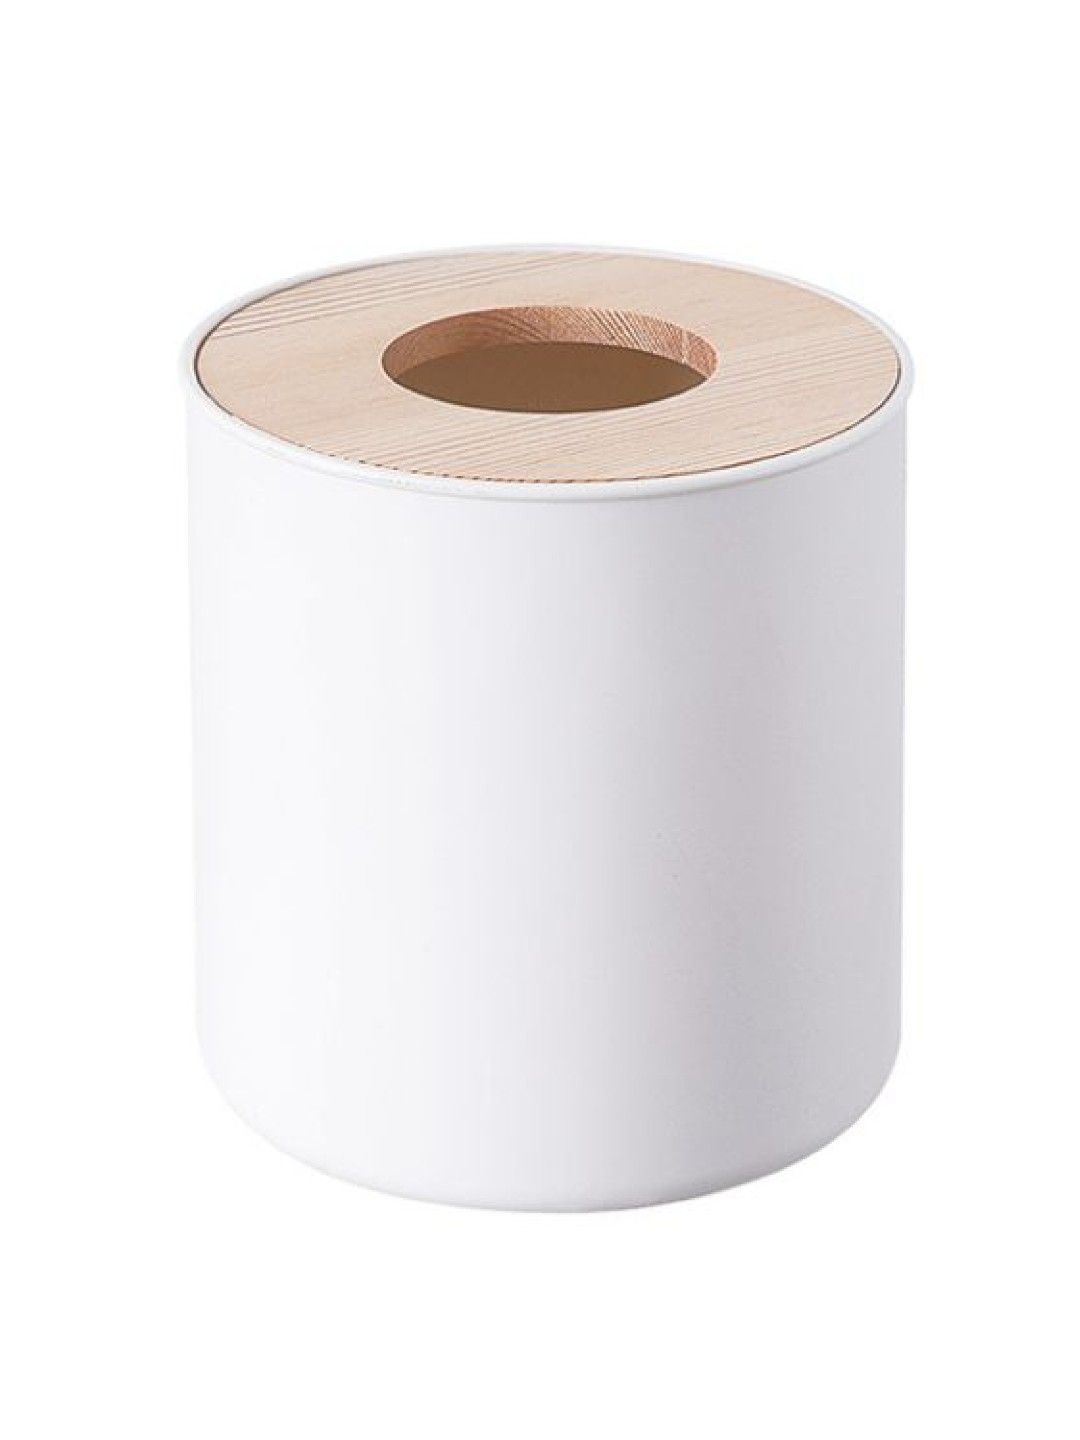 The Neat Project Sachi Circular Tissue Holder